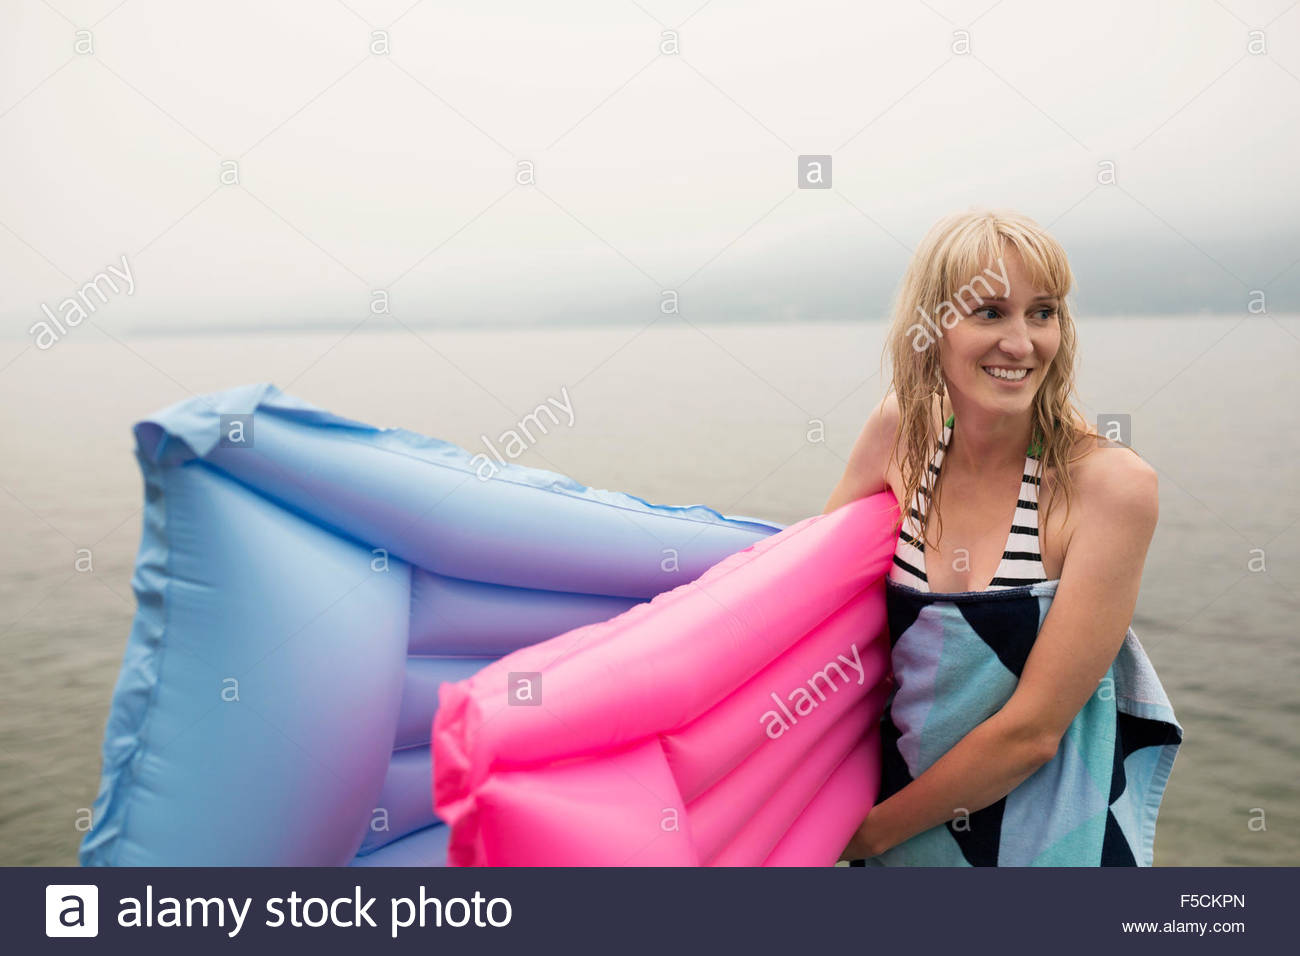 Smiling woman carrying pool rafts in lake Stock Photo